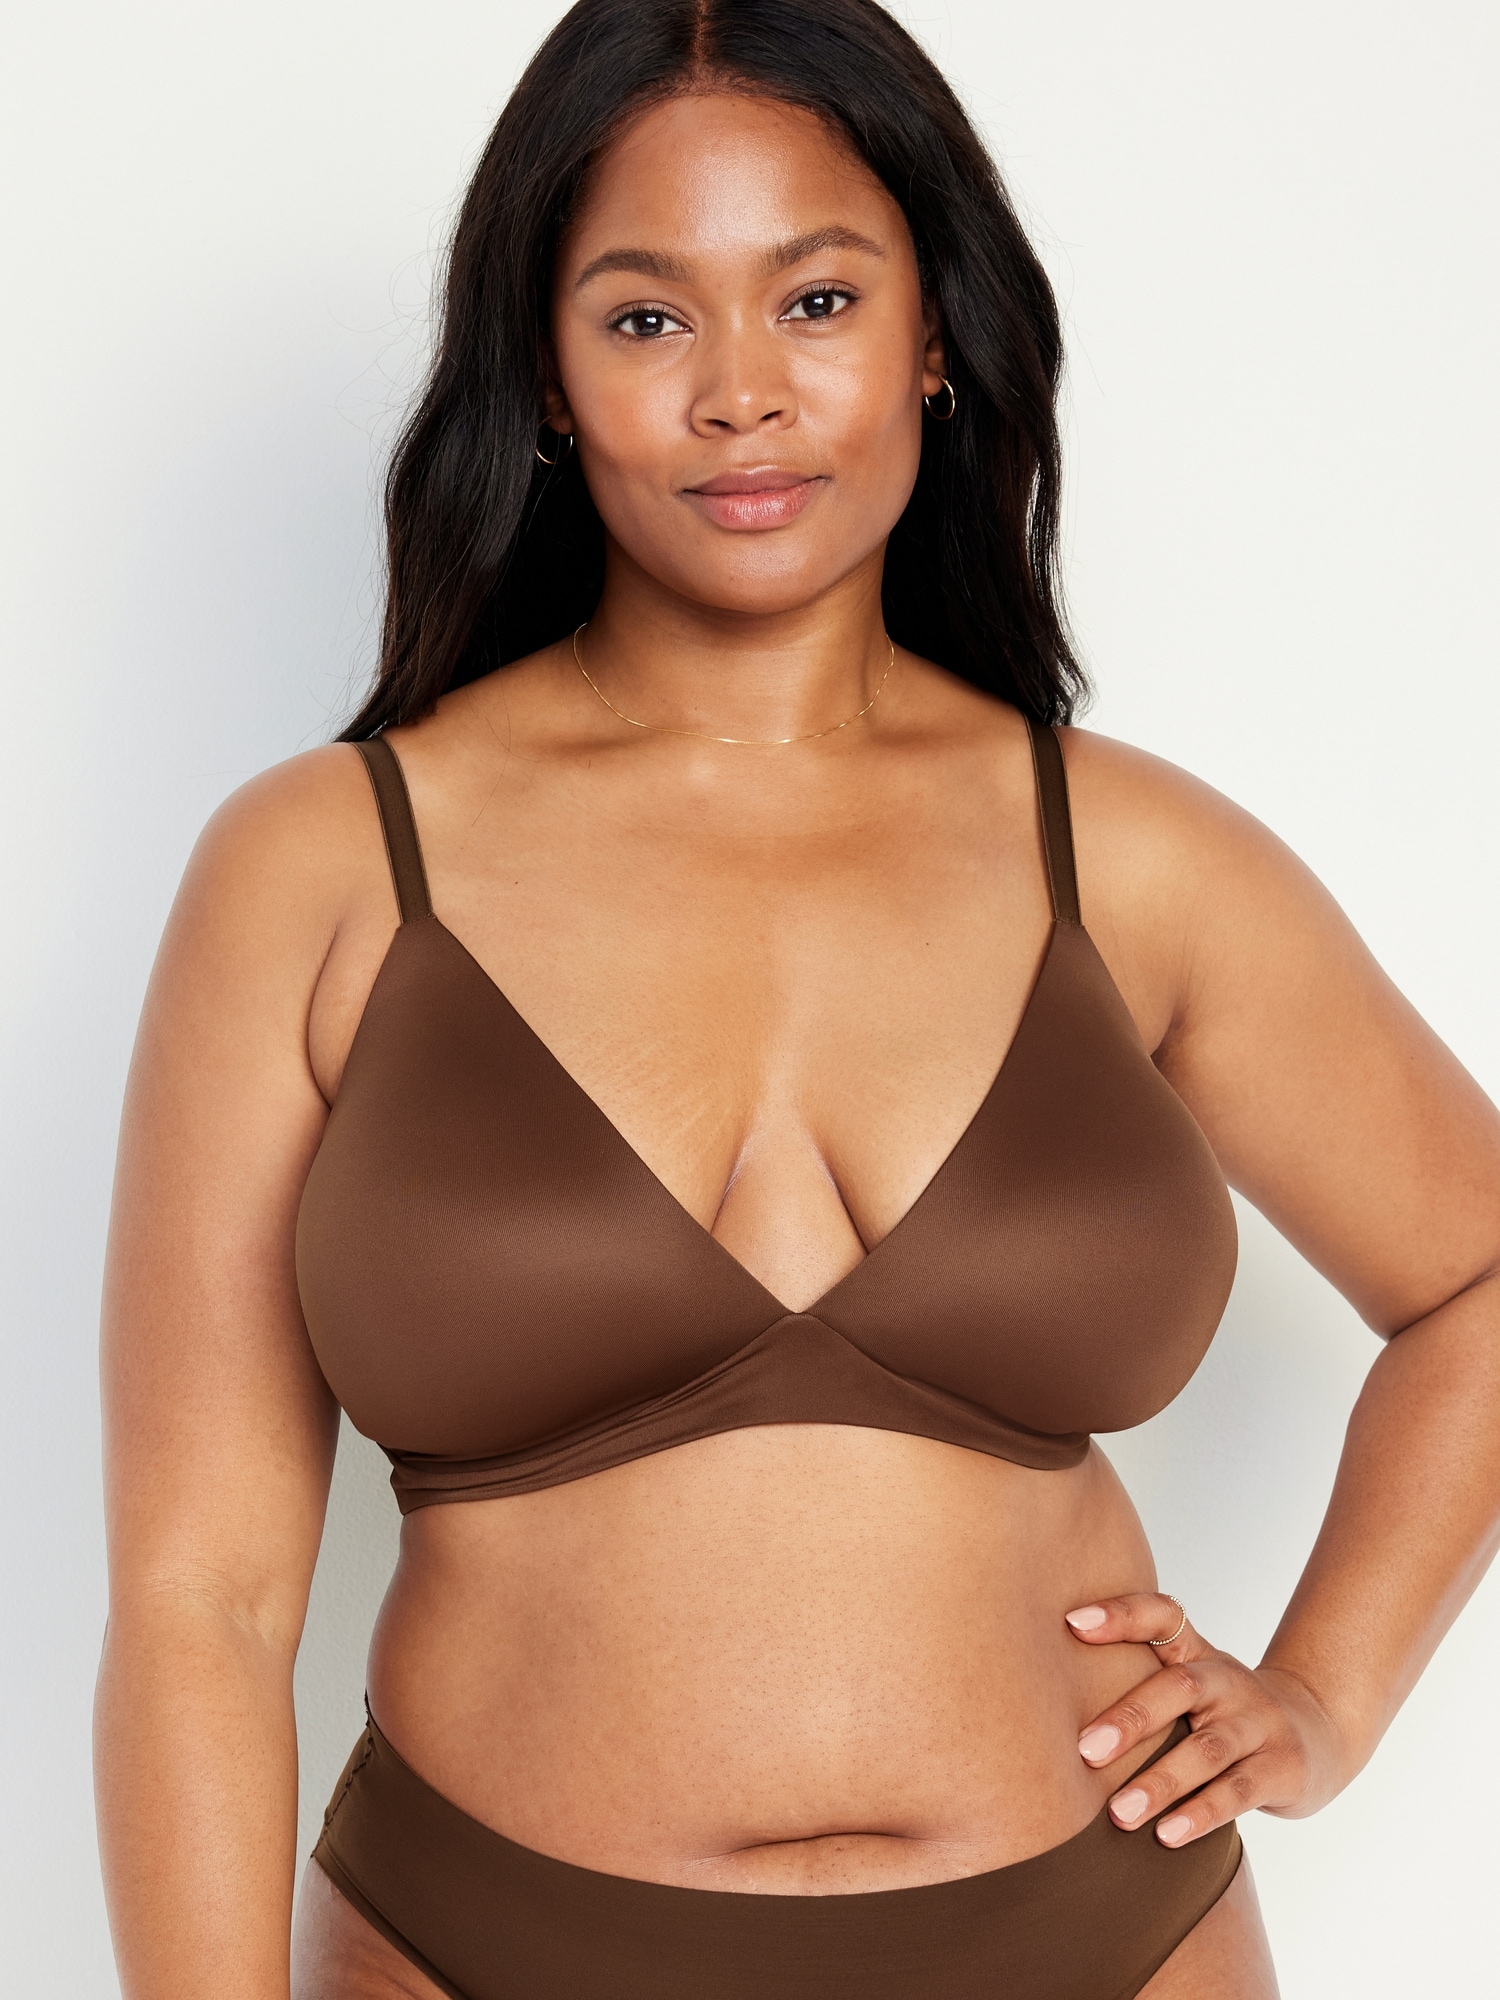 6IXTY8IGHT Underwired Bra with Soft Cups Elements Size 70 °C Cup Brown :  : Fashion